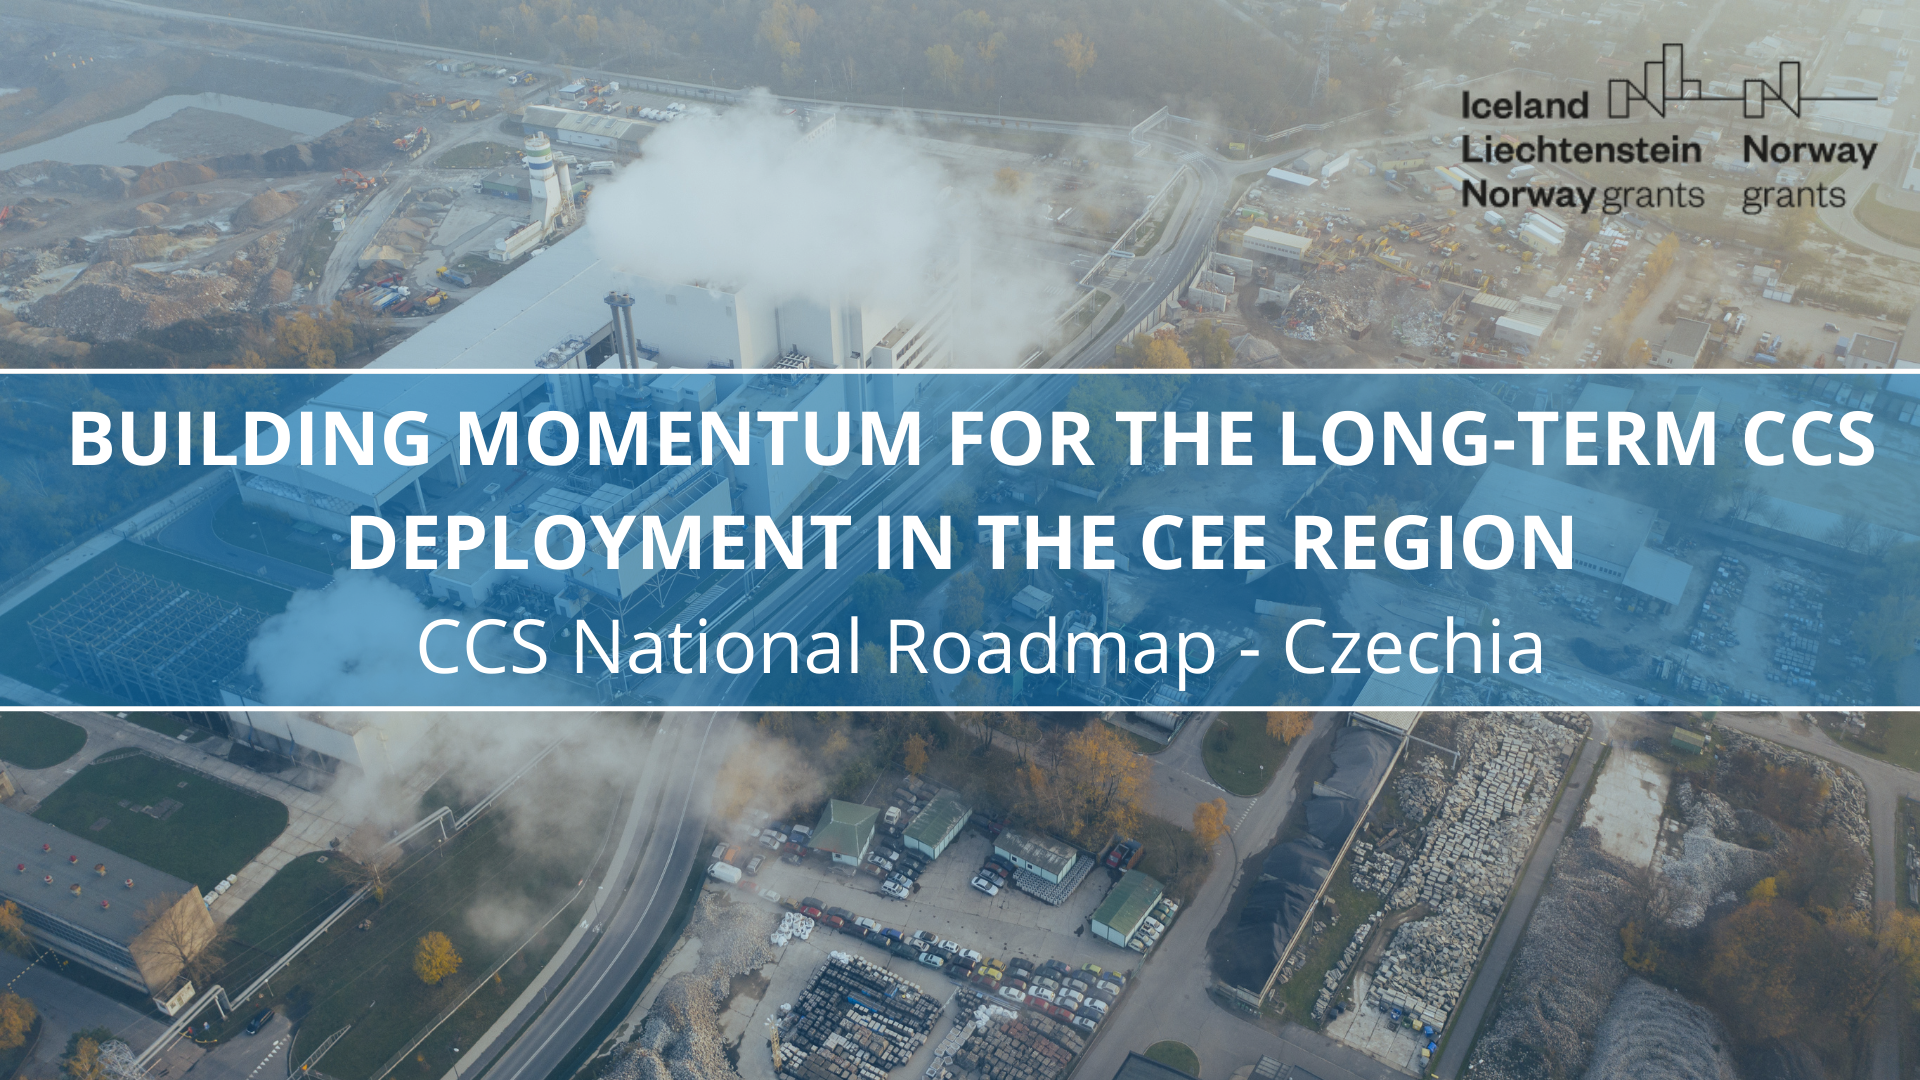 BUILDING MOMENTUM FOR THE LONG-TERM CCS DEPLOYMENT IN THE CEE REGION –  CCS National Roadmap – Czechia